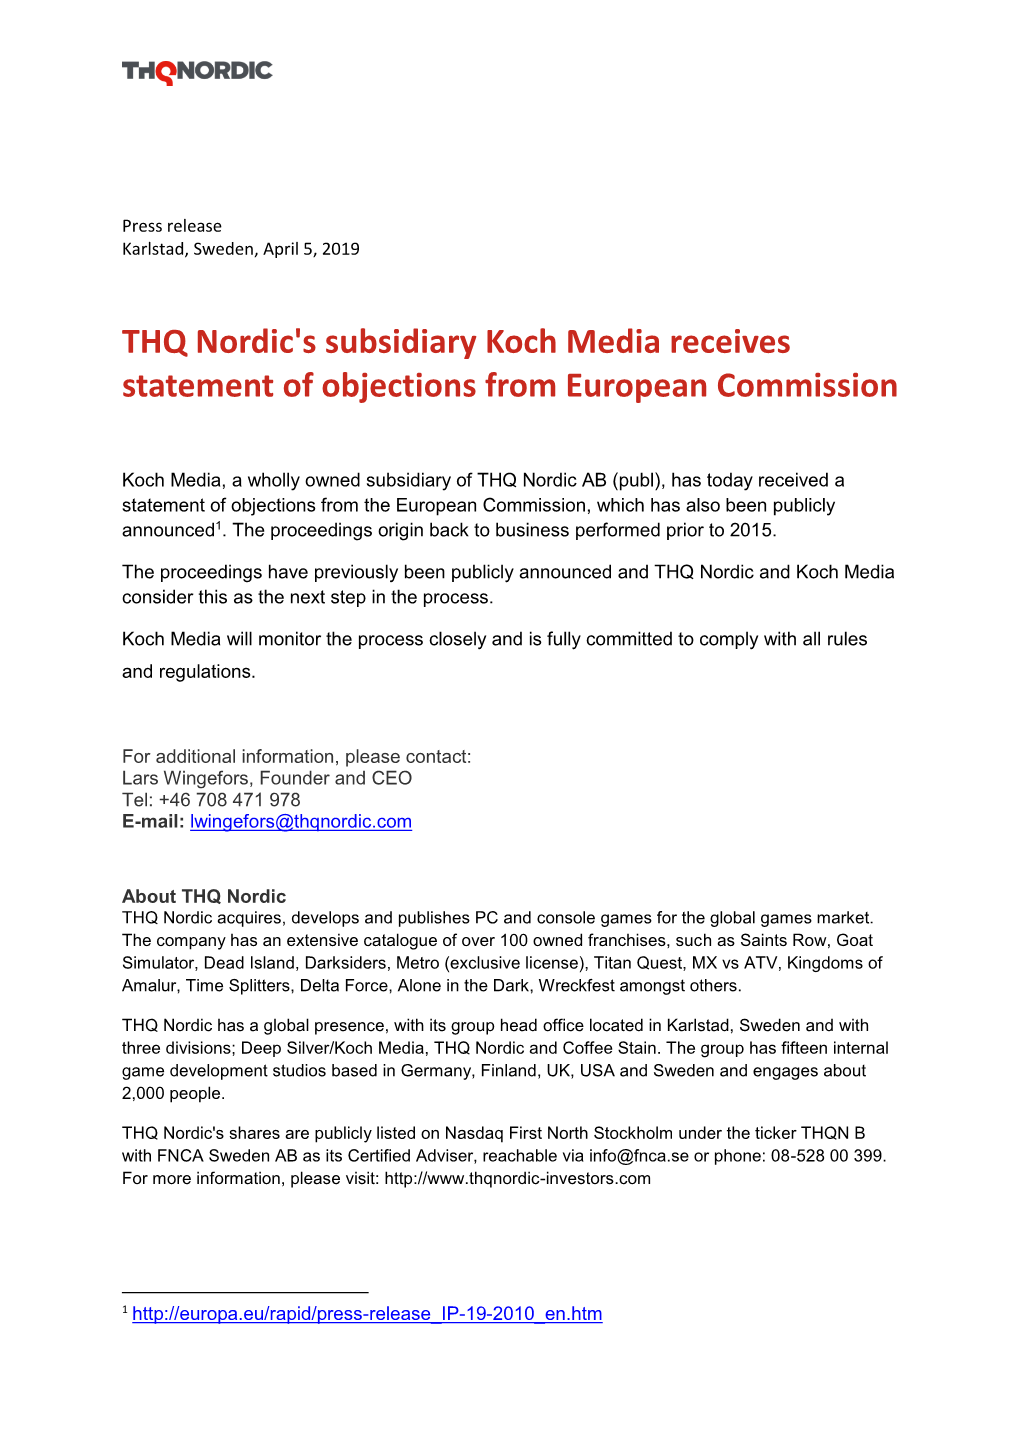 THQ Nordic's Subsidiary Koch Media Receives Statement of Objections from European Commission